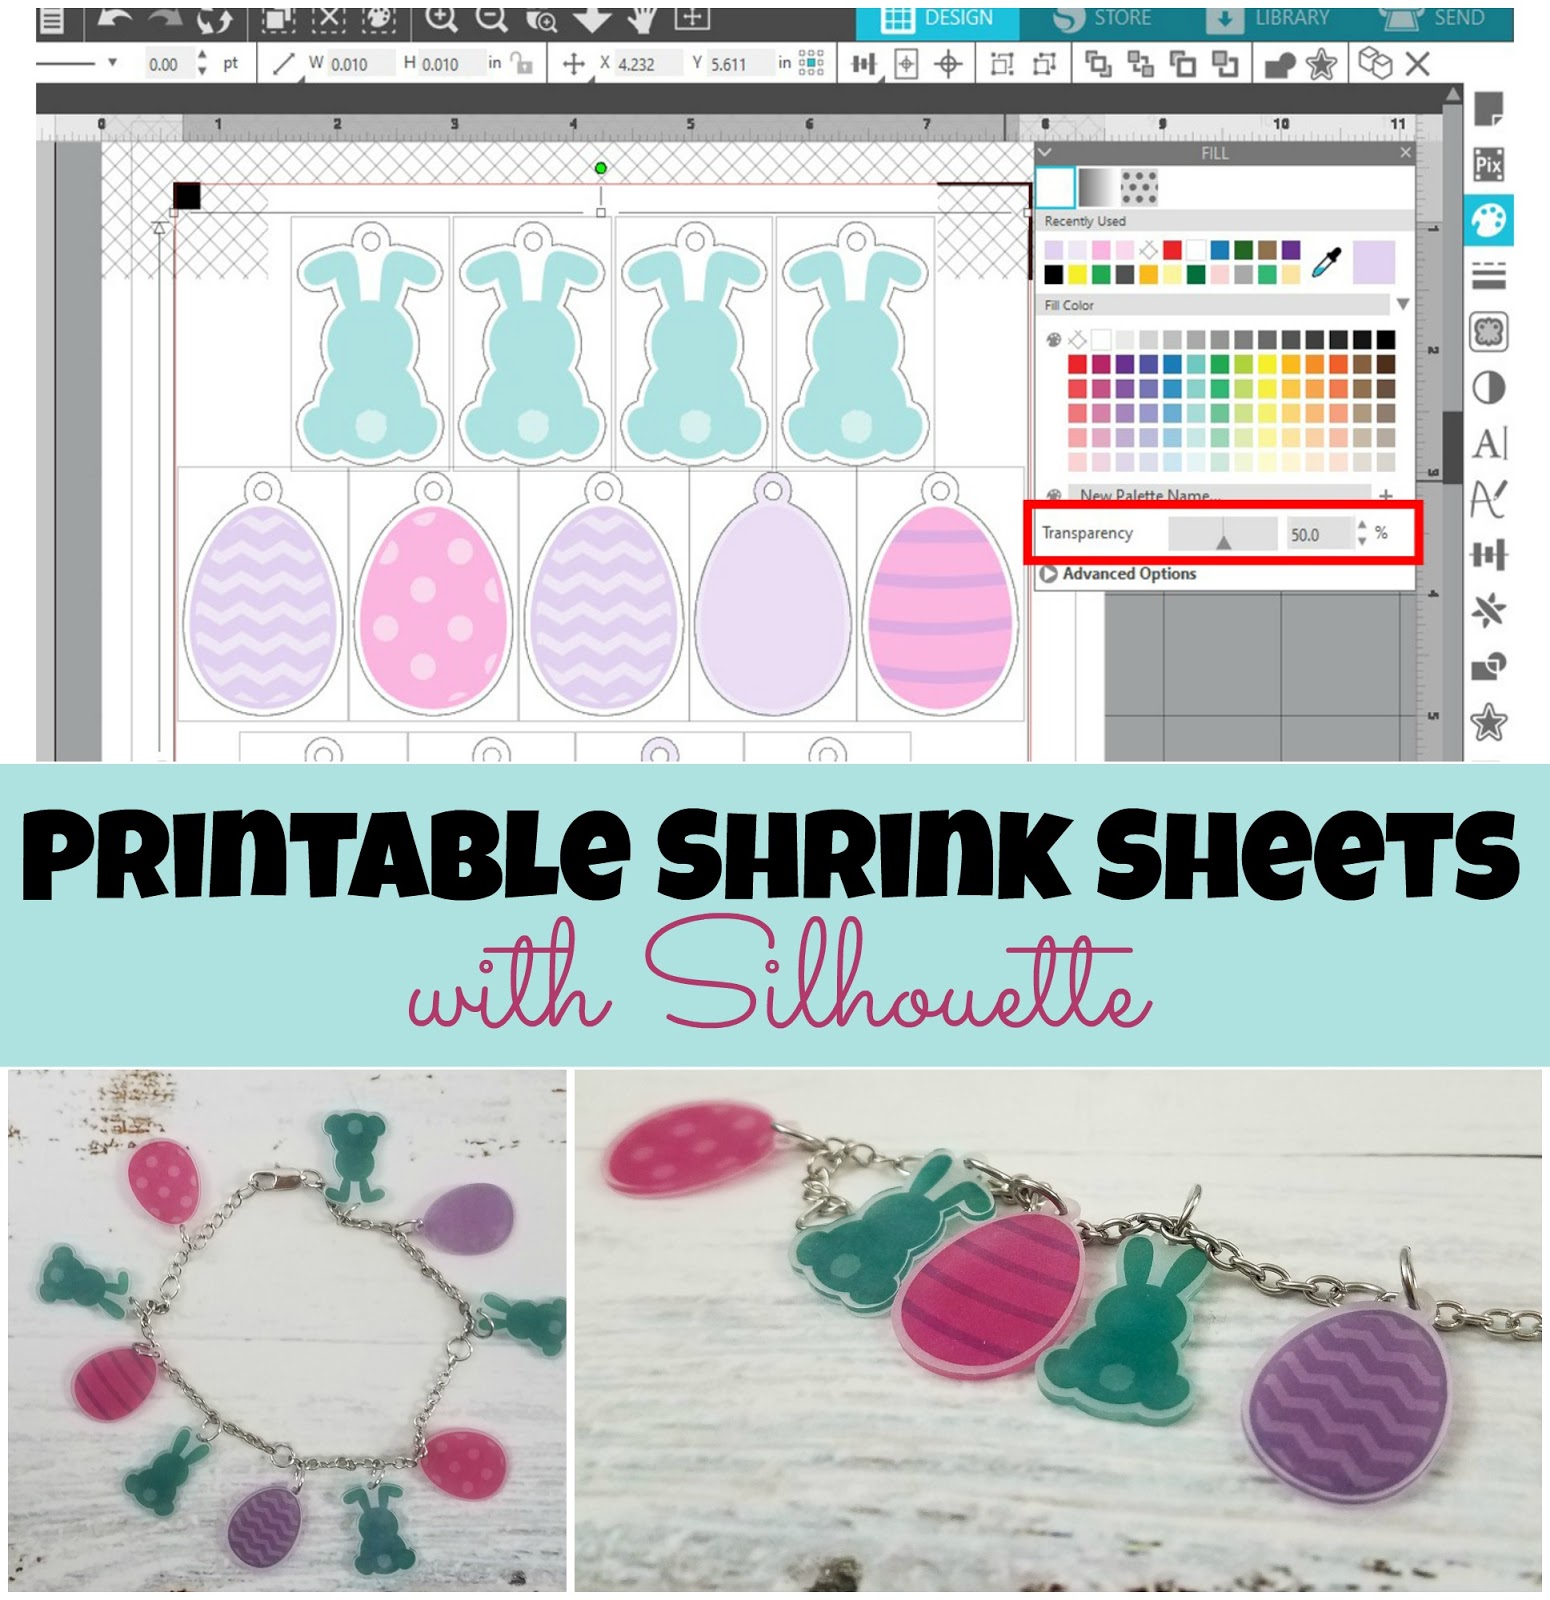 How to Use Silhouette Printable Shrink Sheets - Silhouette School